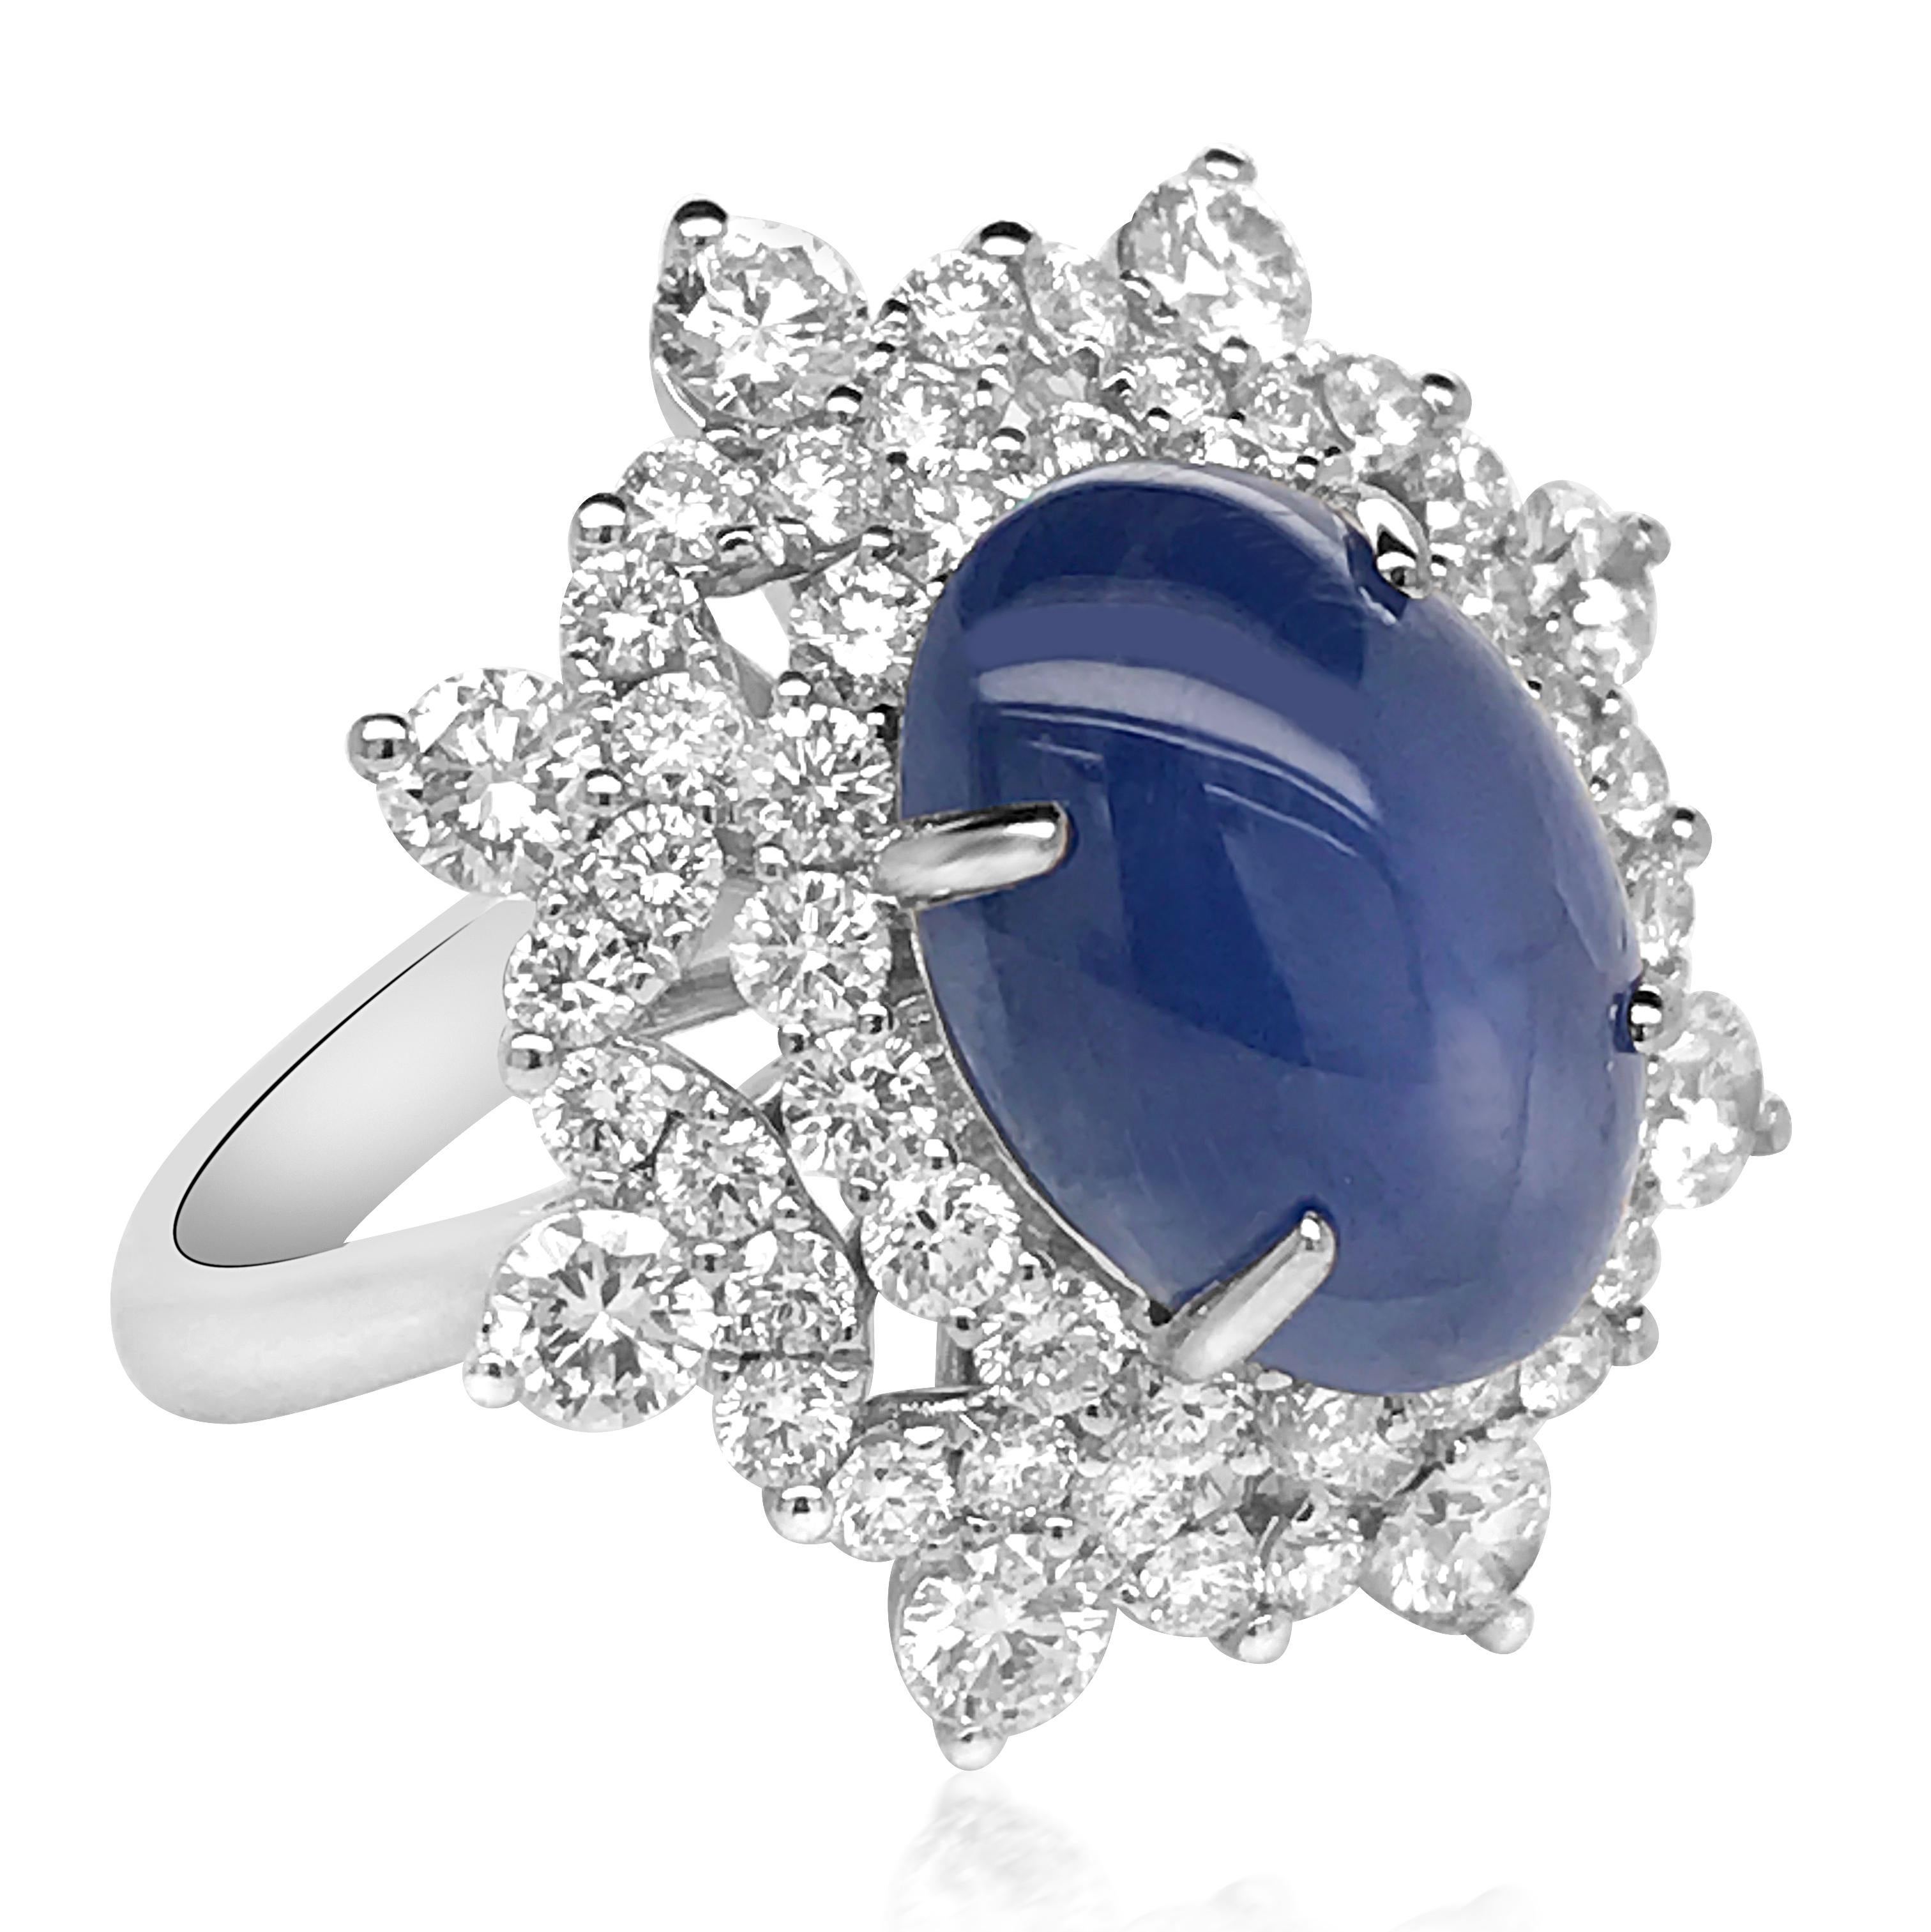 This stunning Burma natural blue sapphire and diamond ring is crafted in 18K white gold, featuring a star sapphire weighing 5.11 carats; surrounded by 58 round brilliant-cut diamonds weighing a total of 1.83 carats, most with E-F color and VS-SI